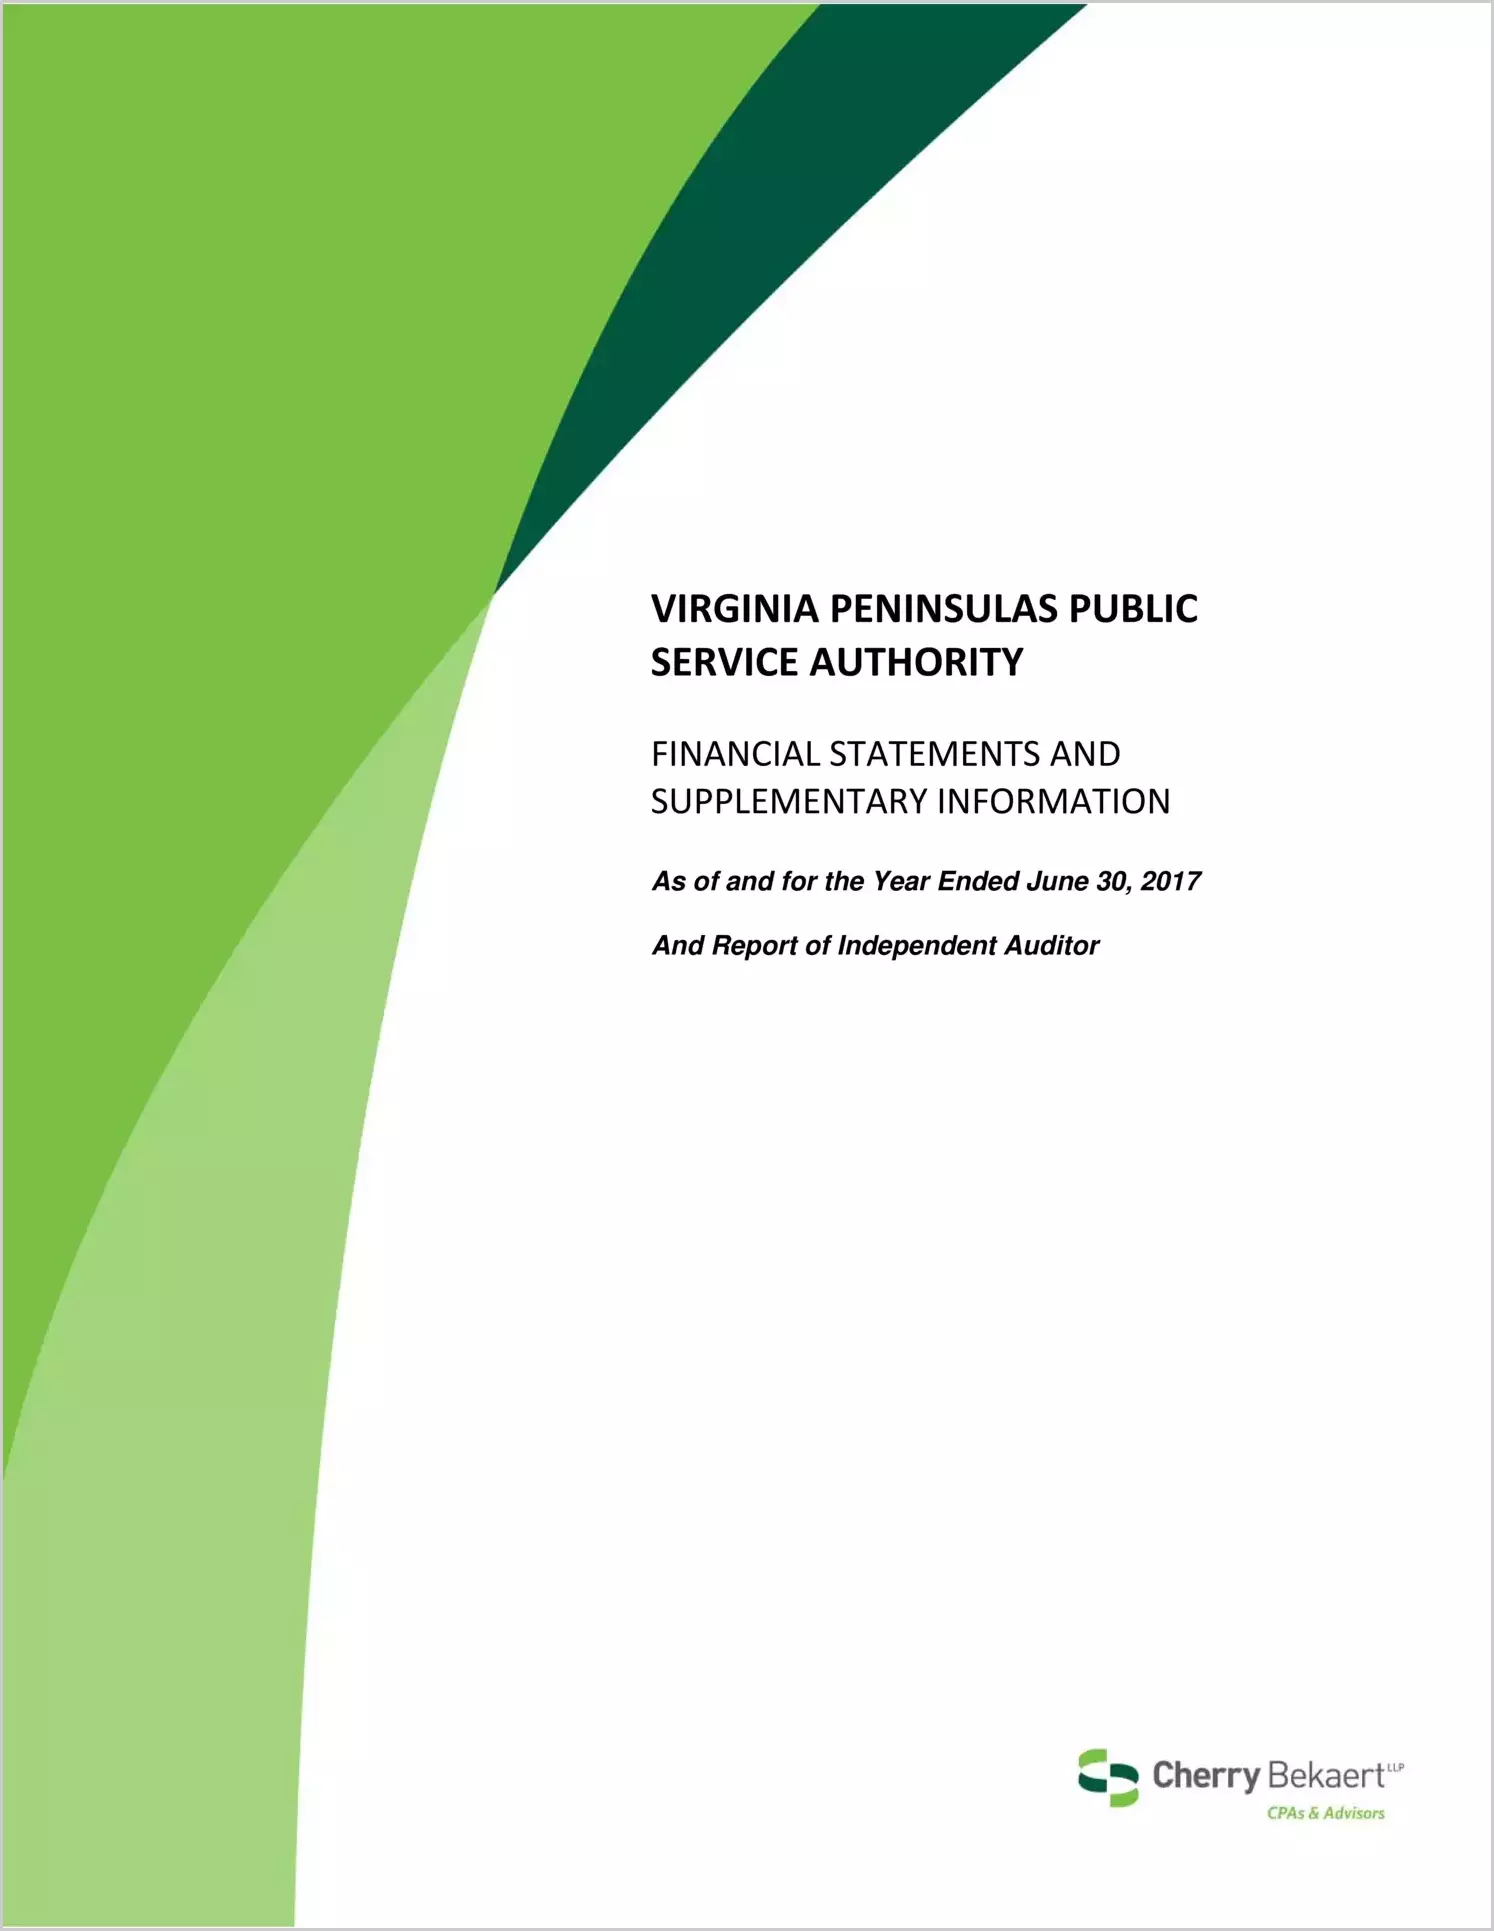 2017 ABC/Other Annual Financial Report  for Virginia Peninsulas Public Service Authority